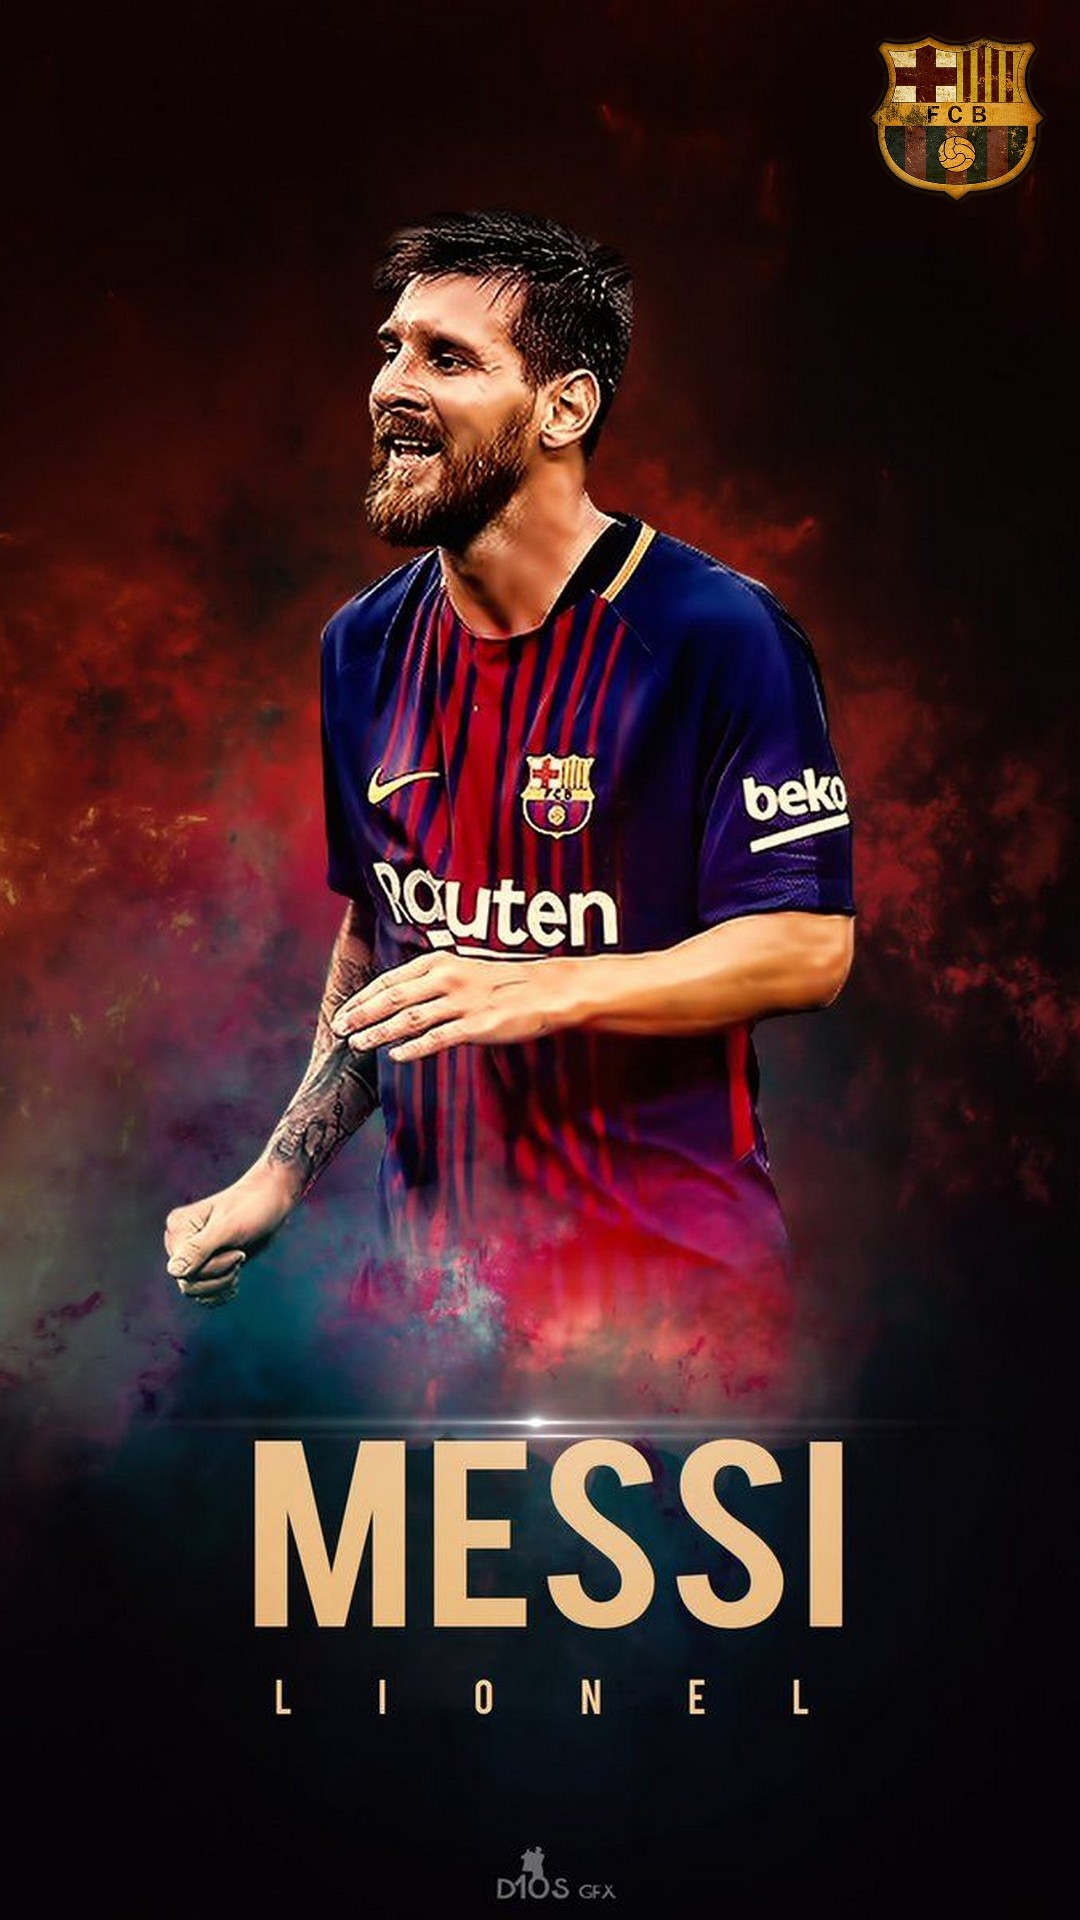 Lionel Messi iPhone Wallpapers With Resolution 1080X1920 pixel. You can make this wallpaper for your Mac or Windows Desktop Background, iPhone, Android or Tablet and another Smartphone device for free